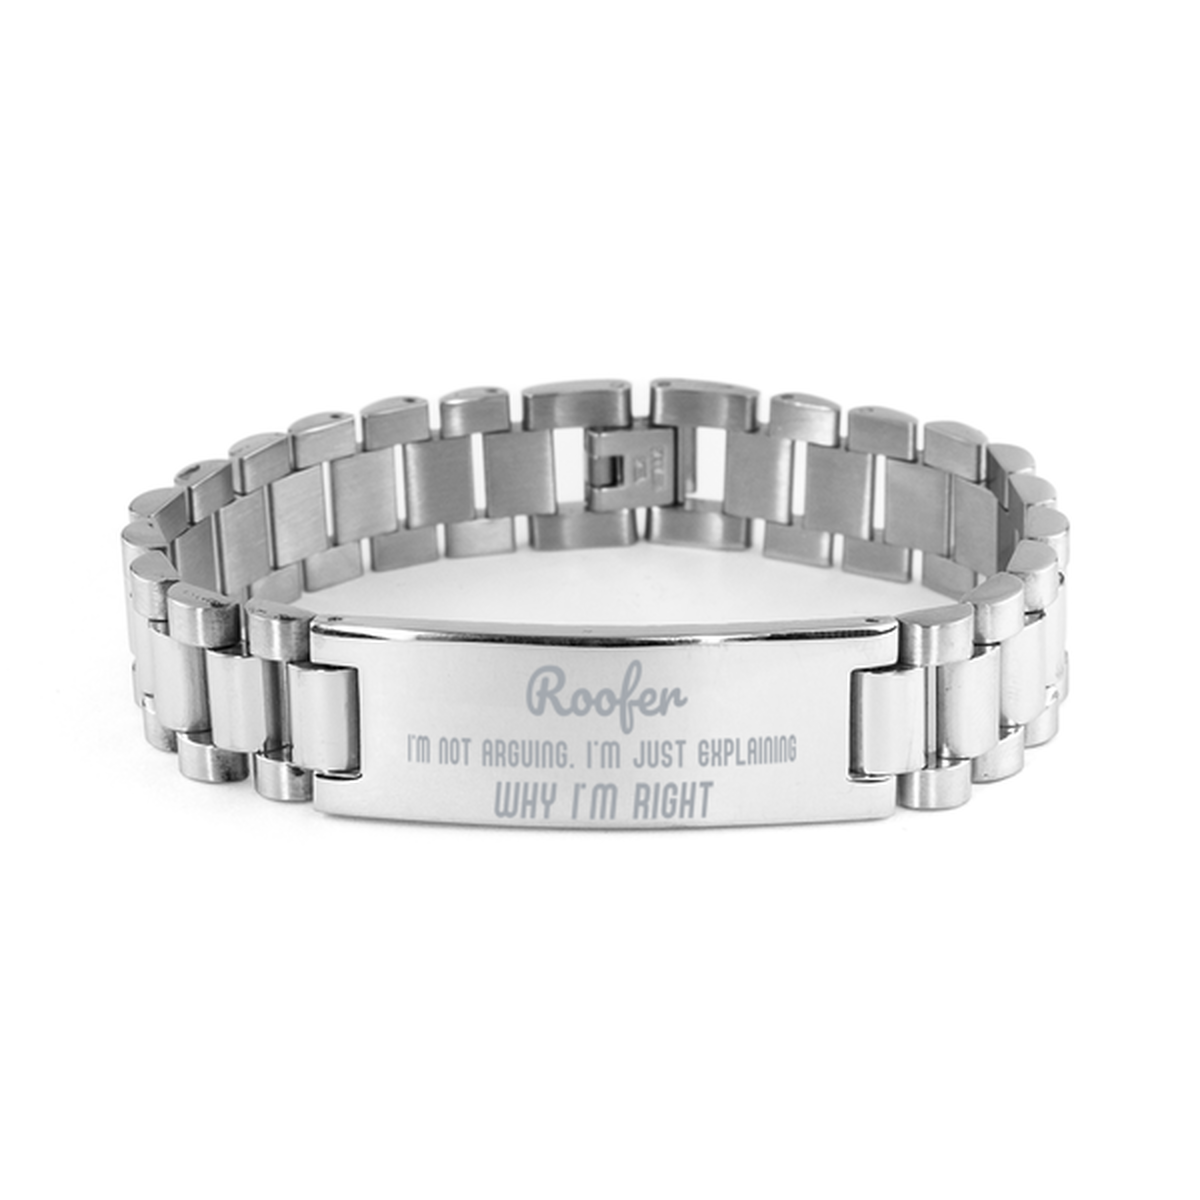 Roofer I'm not Arguing. I'm Just Explaining Why I'm RIGHT Ladder Stainless Steel Bracelet, Graduation Birthday Christmas Roofer Gifts For Roofer Funny Saying Quote Present for Men Women Coworker